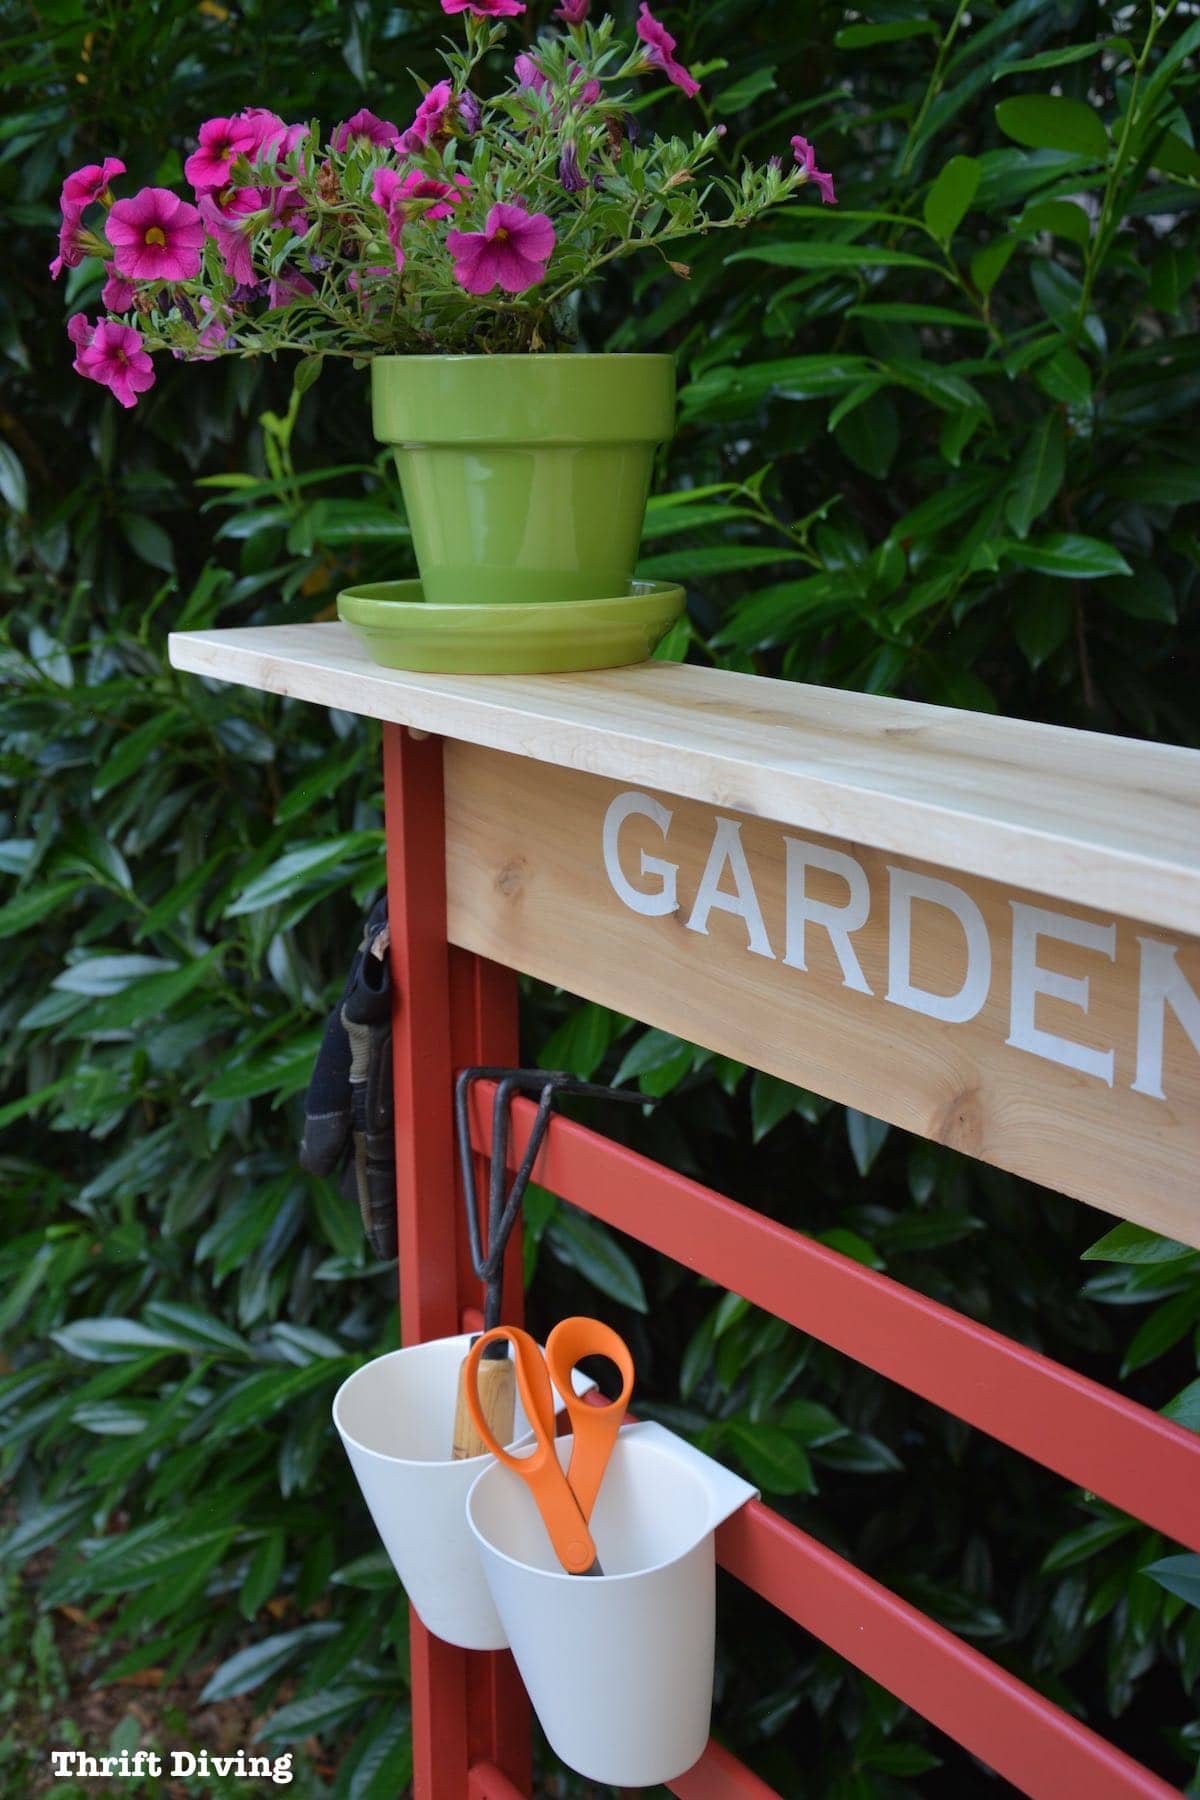 Repurposed toddler bed: What to do with an old toddler bed - Turn a toddler bed into a garden bench and add a shelf on top. - Thrift Diving